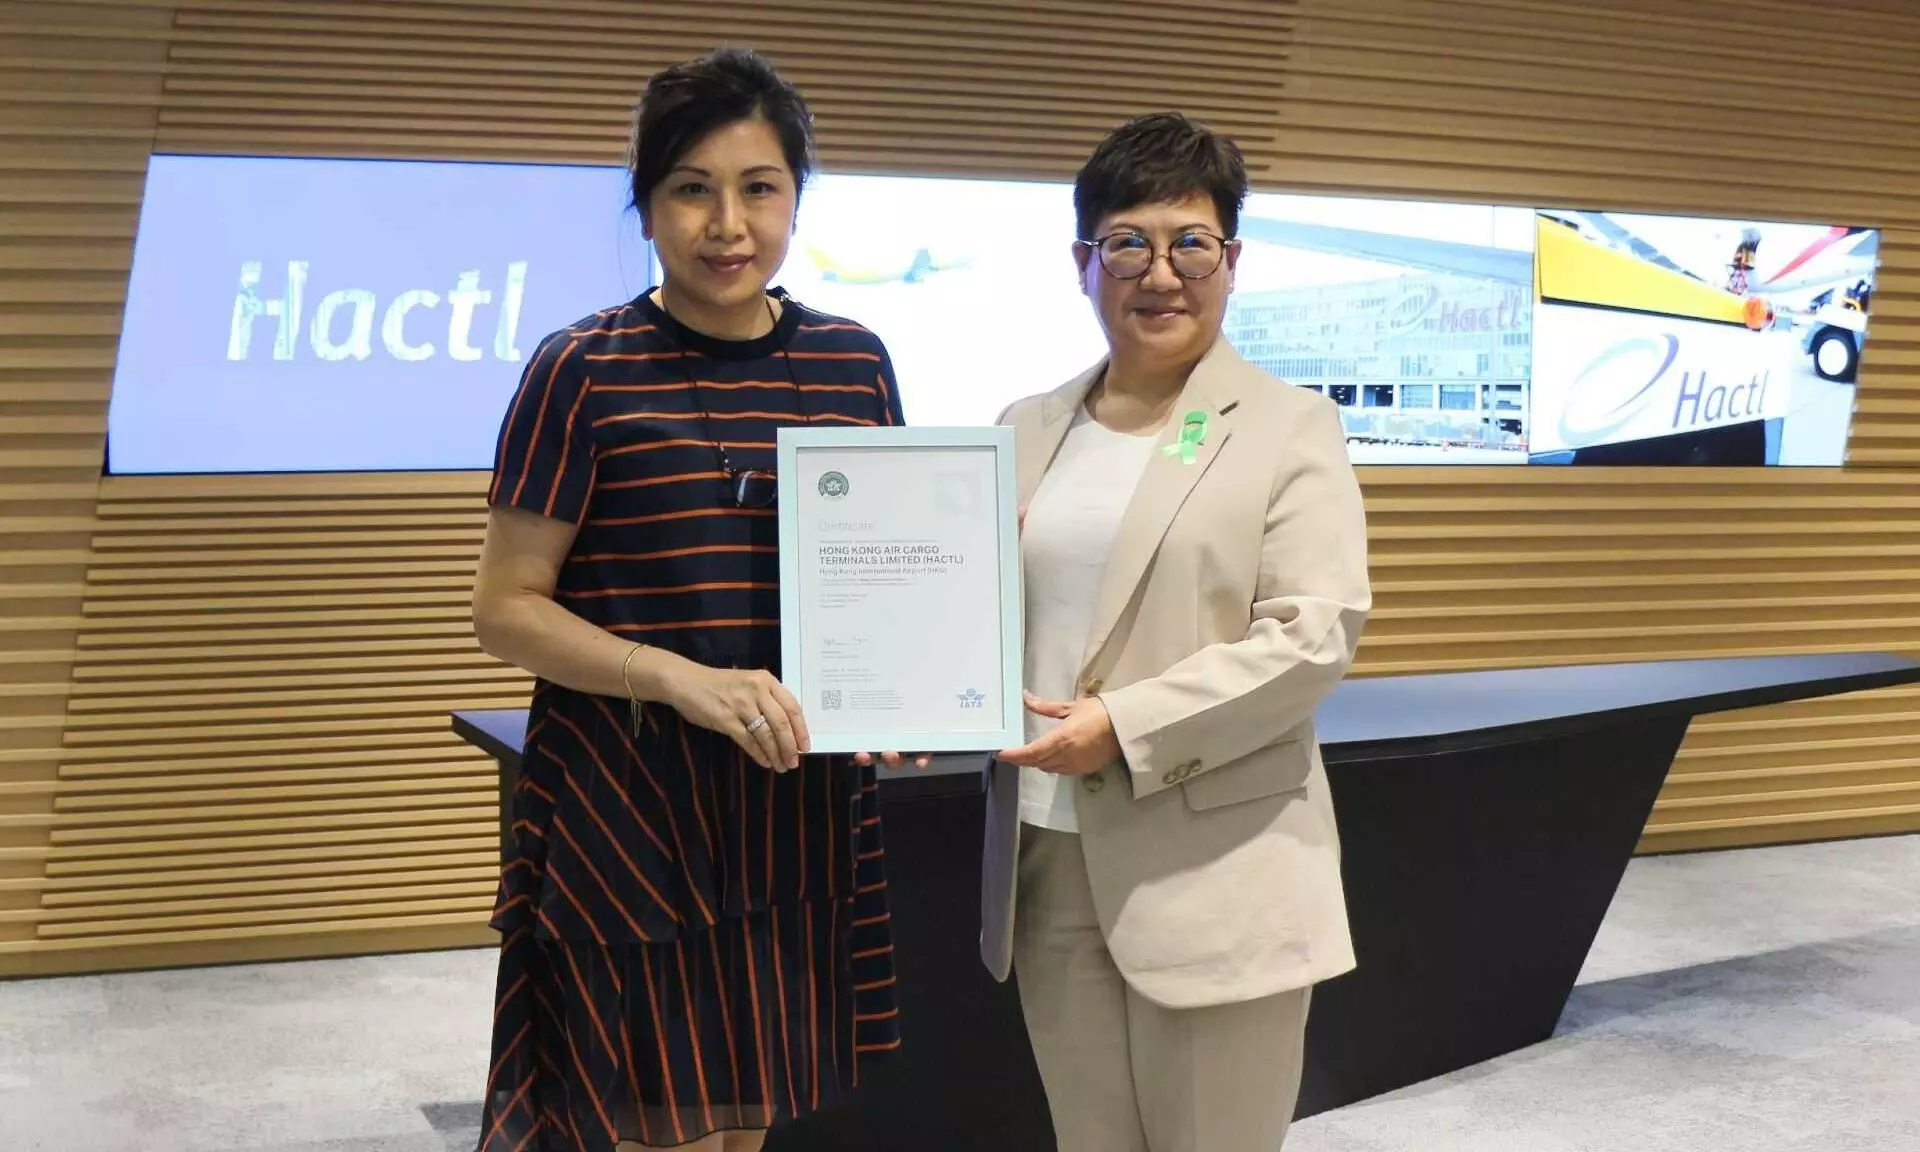 Hactl now holds all four IATA CEIV accreditations